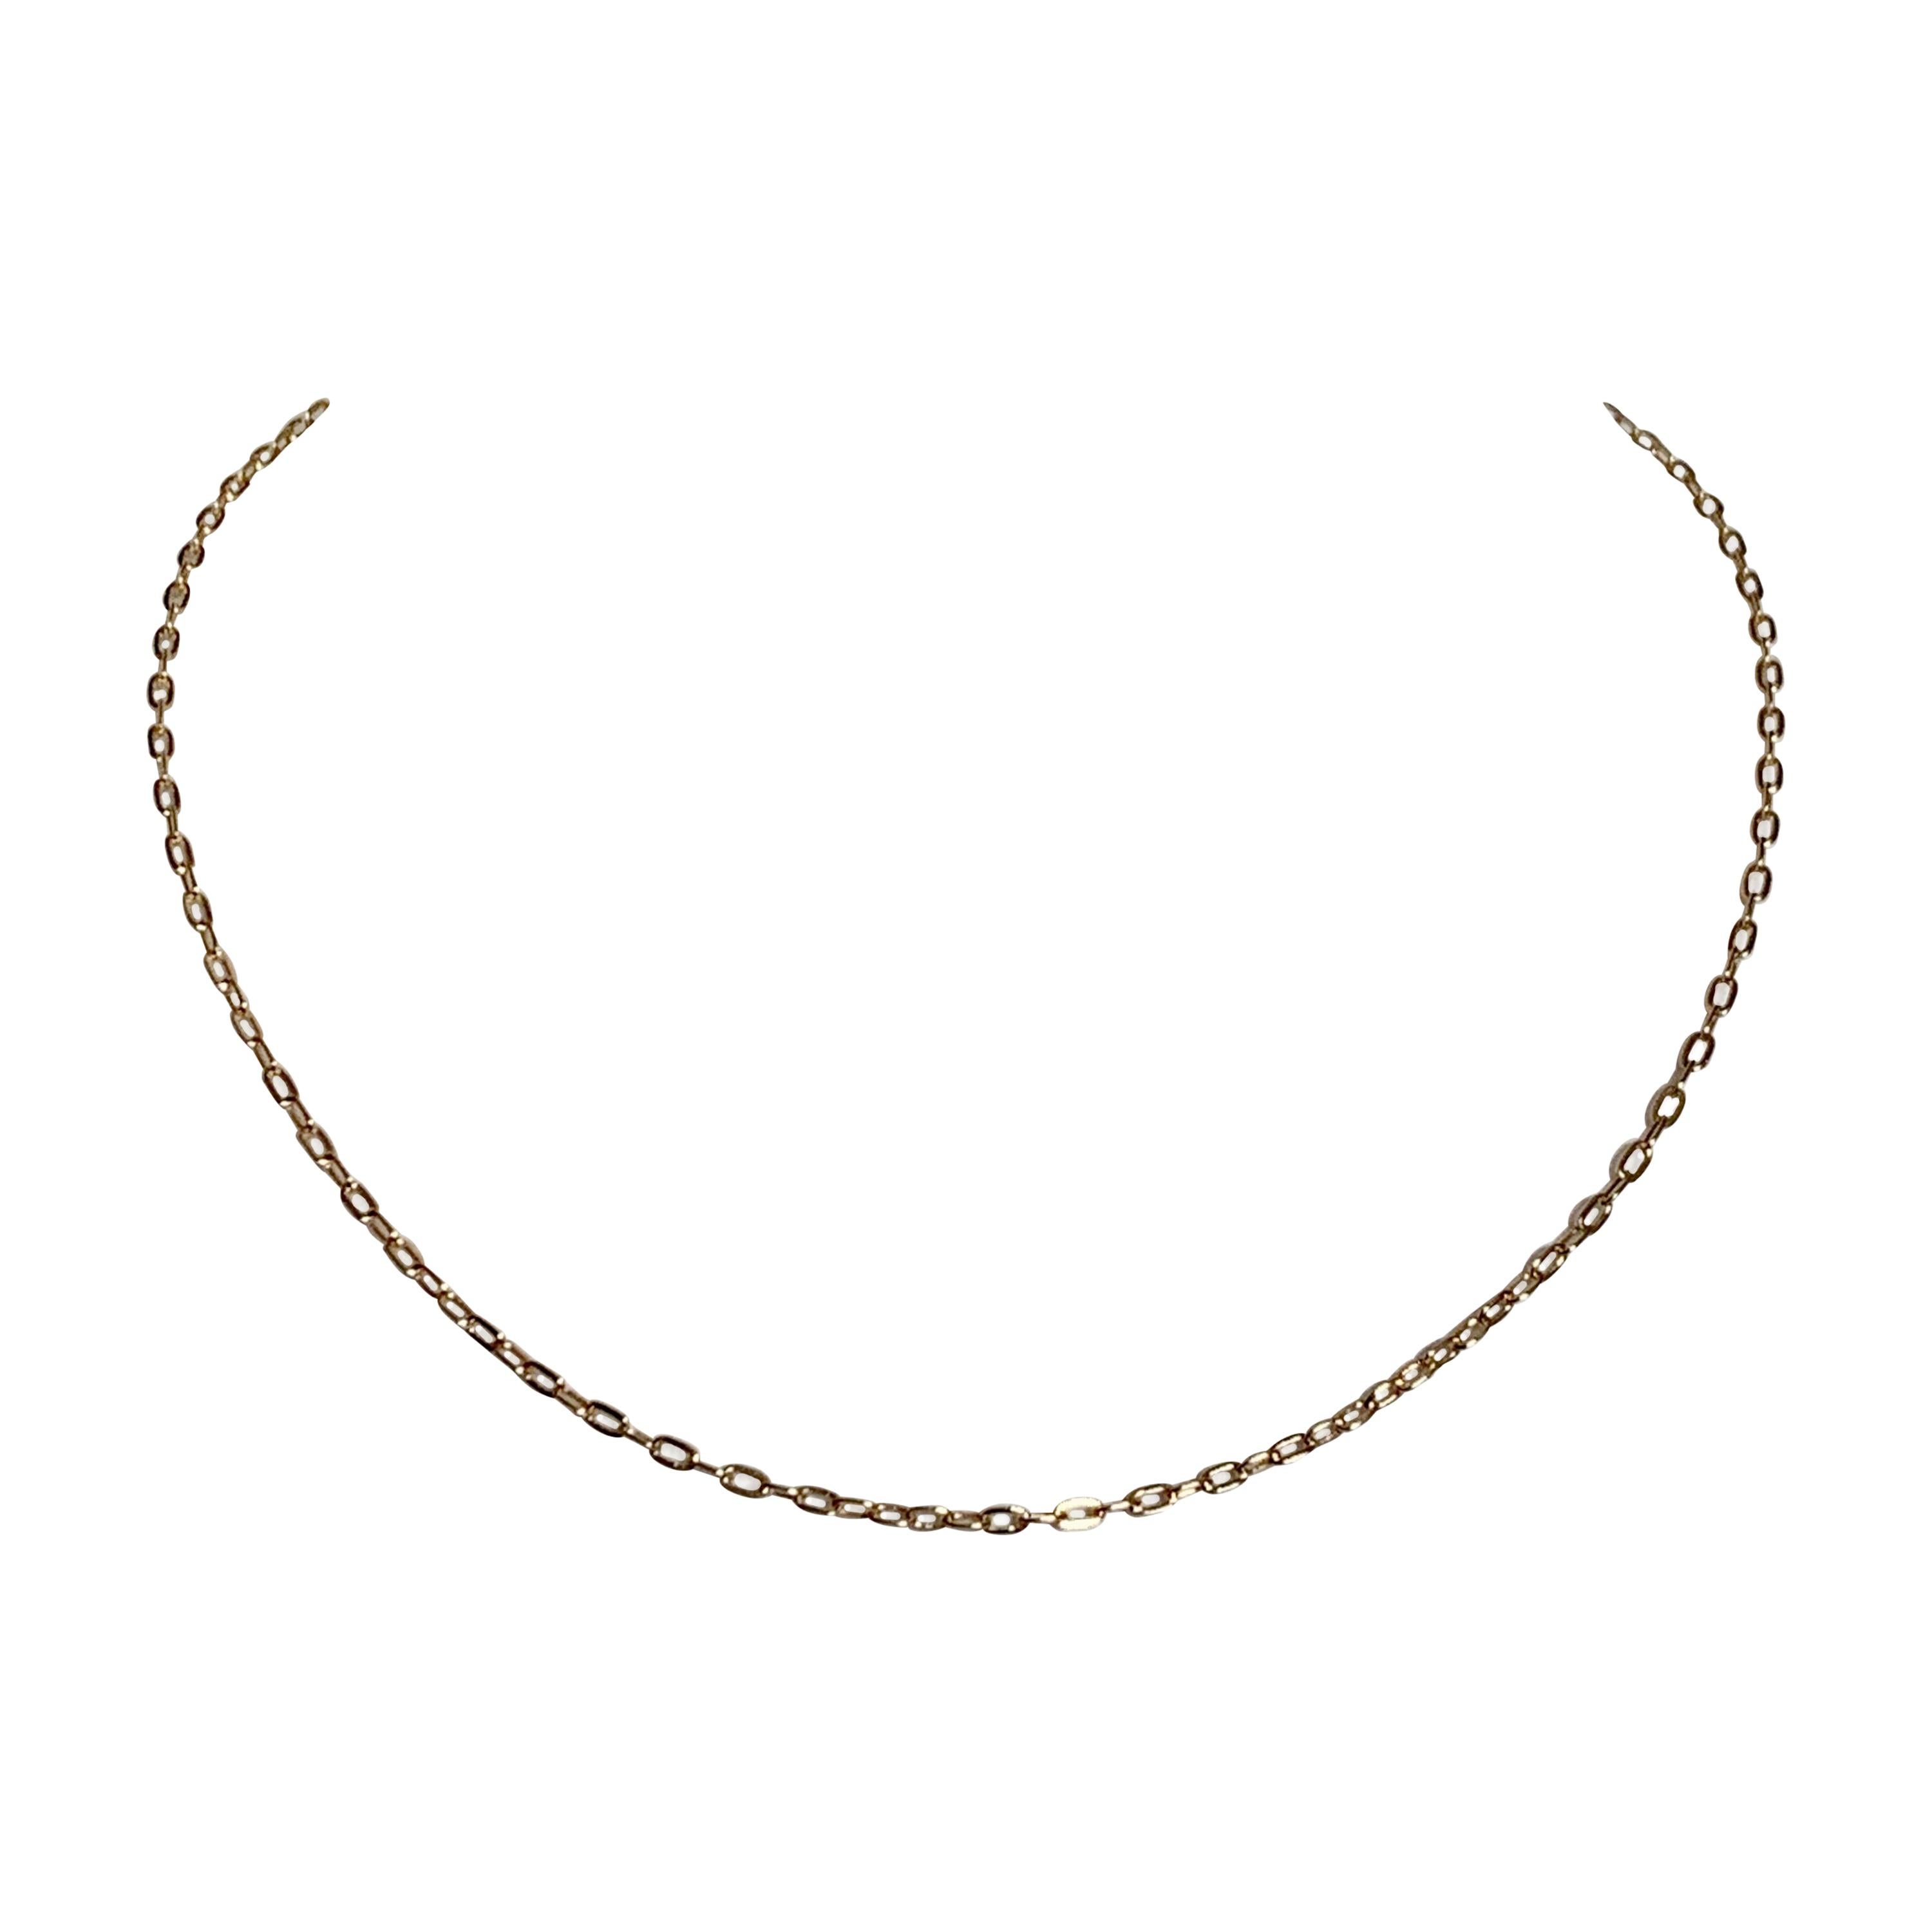 18 Karat Solid Yellow Gold Link Chain Necklace / Choker For Sale